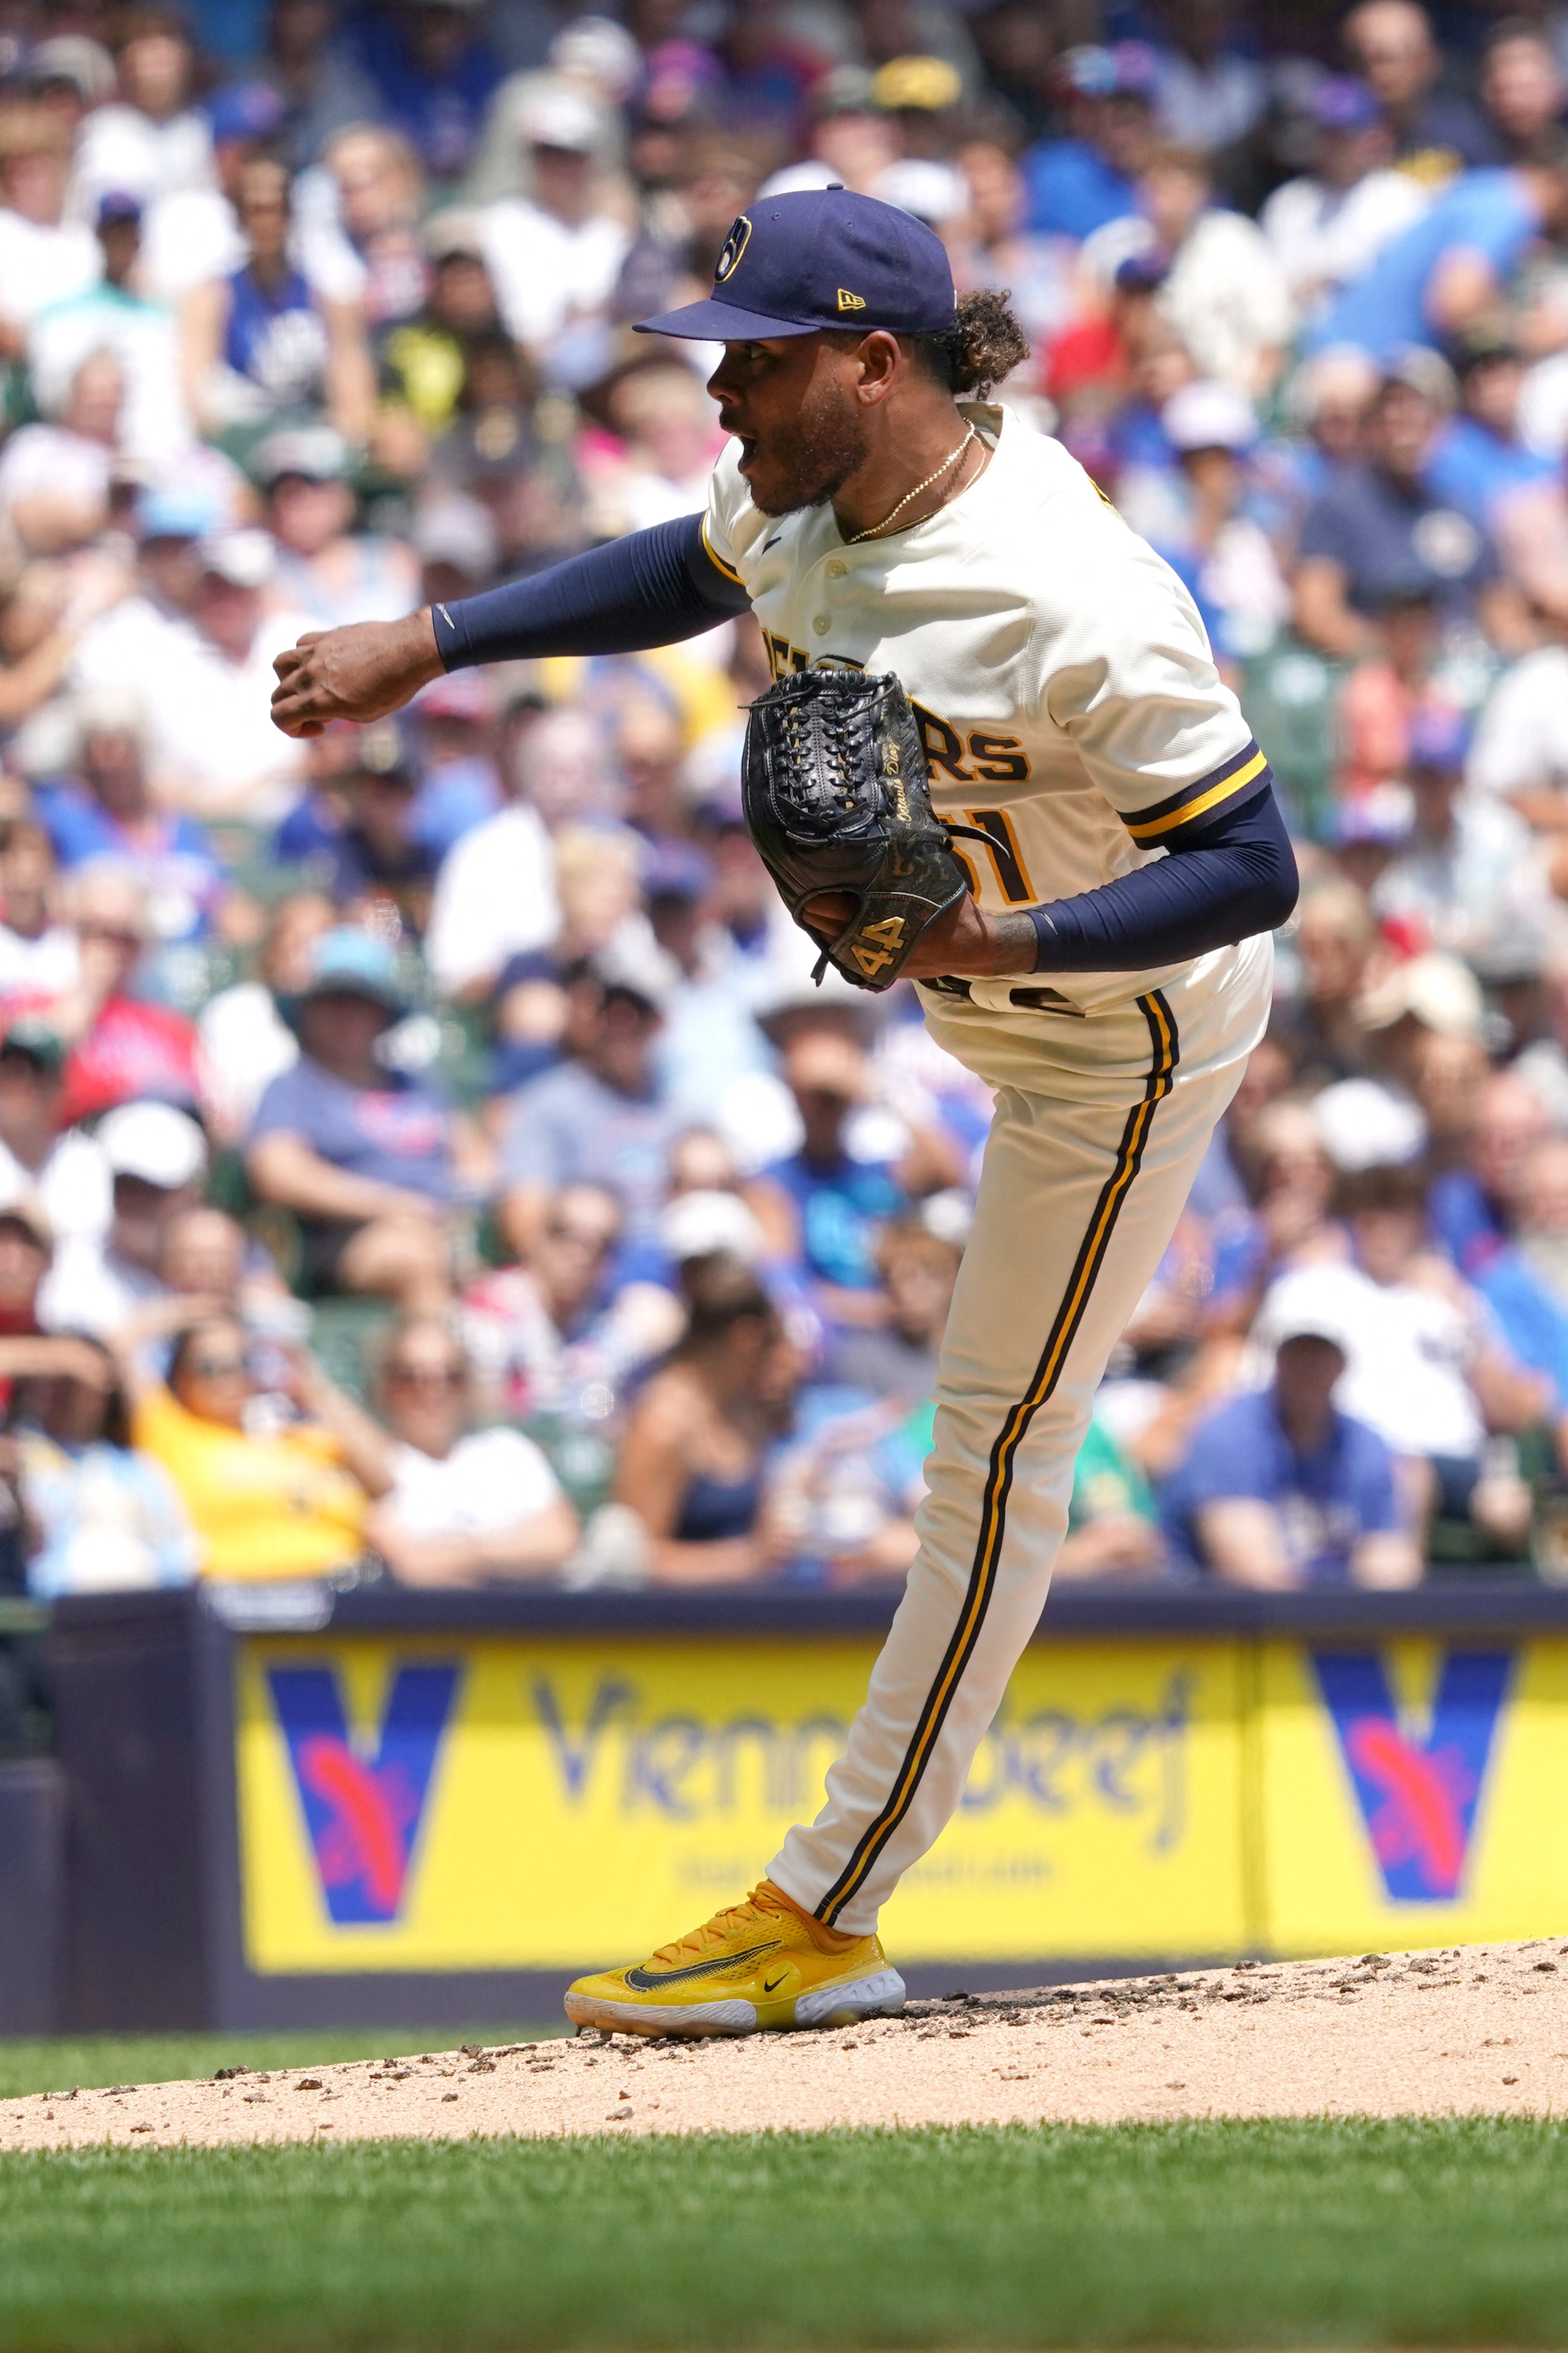 Victor Caratini powers Brewers past Cubs